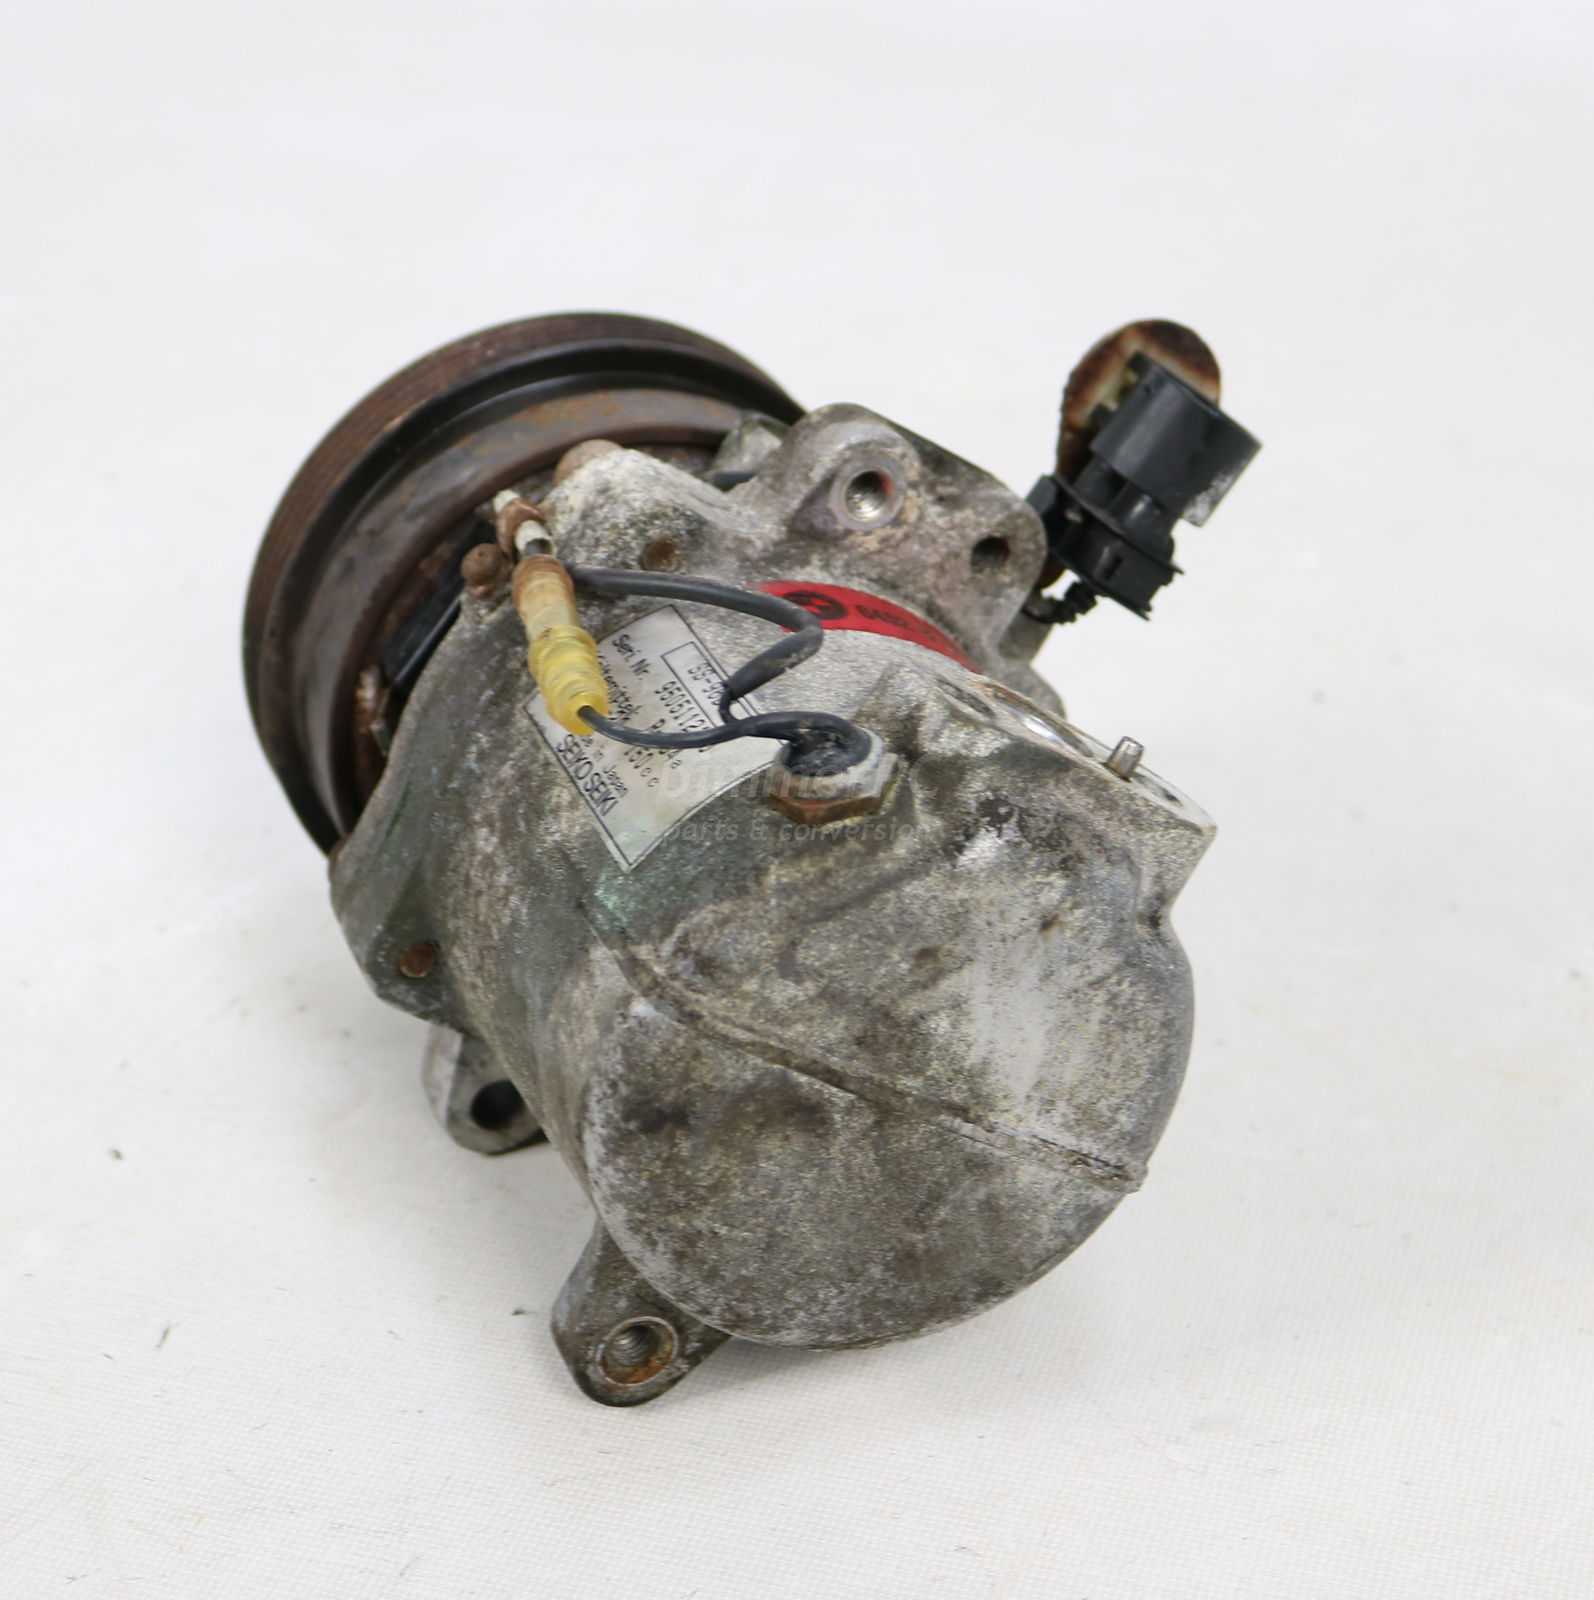 Picture of BMW 64528390228 Air Conditioning Compressor AC E36 Z3 M44 Late M42 for sale